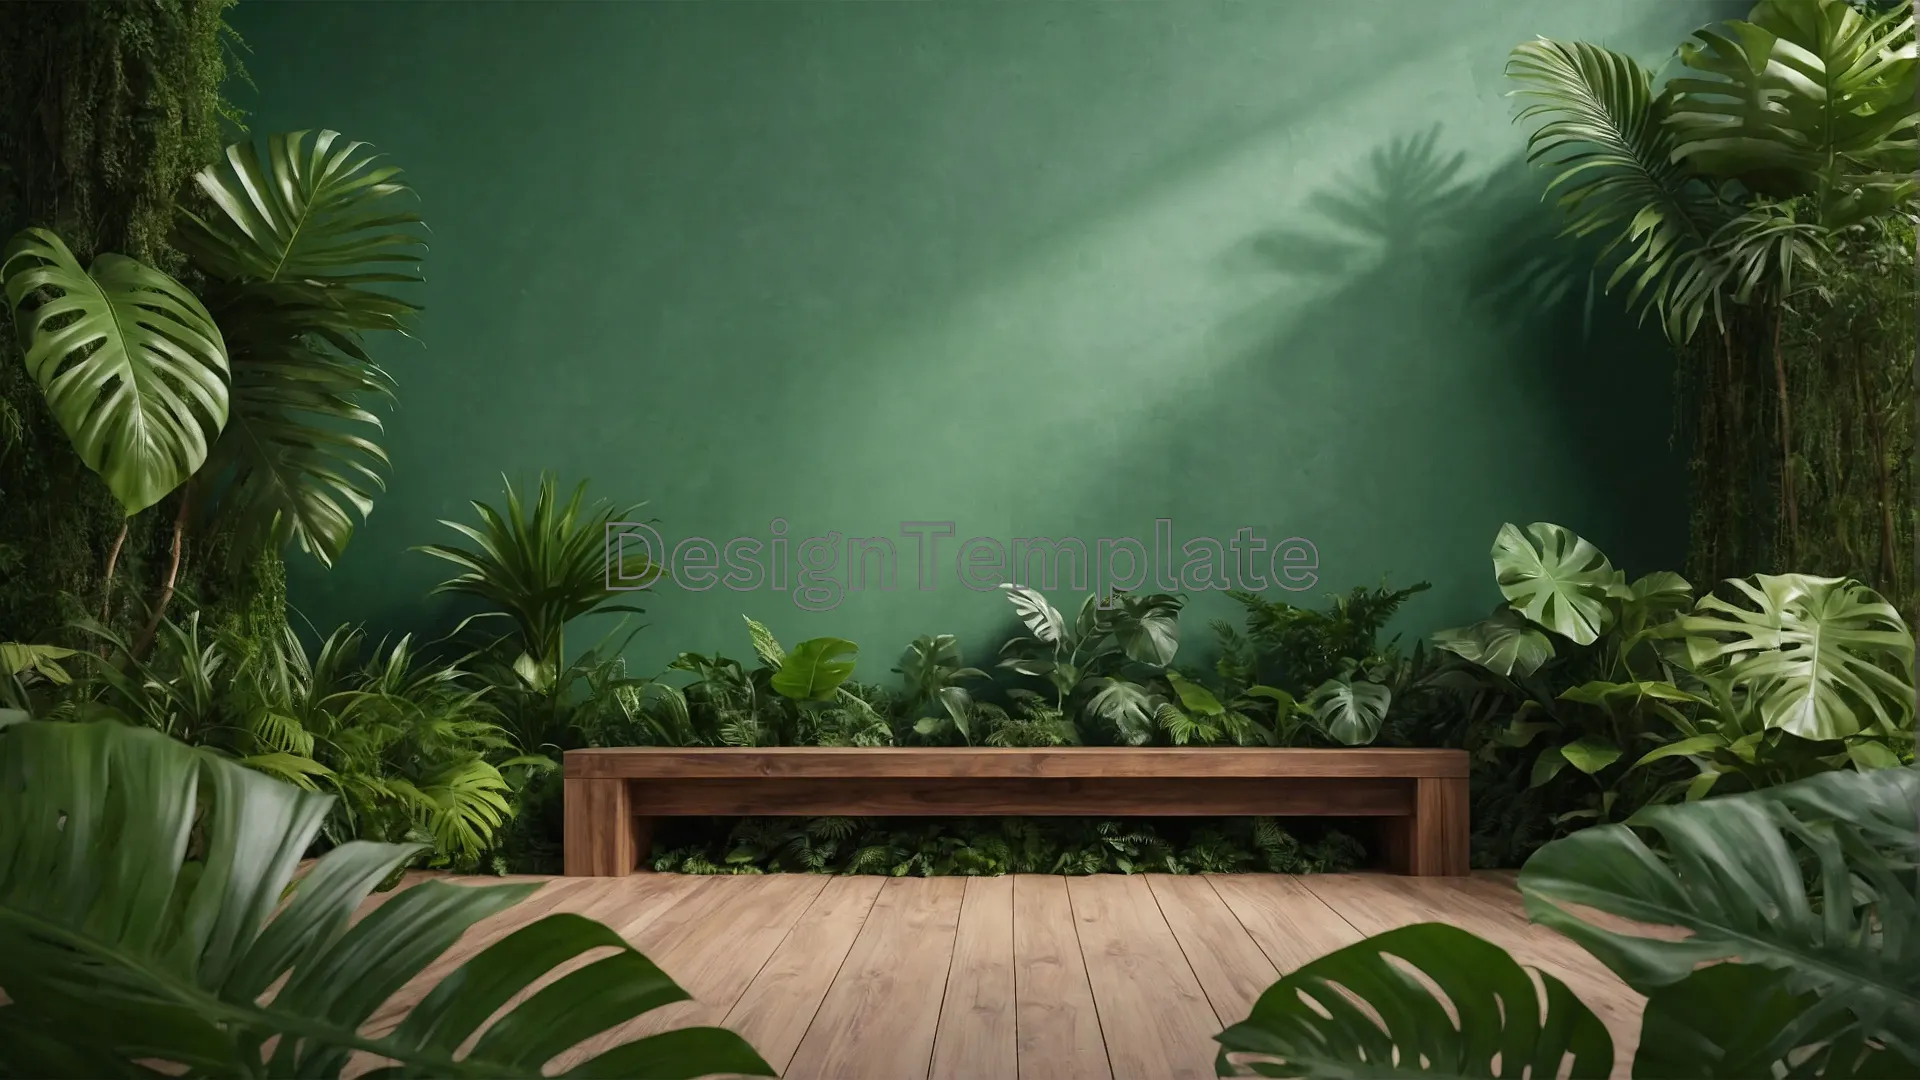 Relaxing Green Nook Peaceful Plant Environment Image image